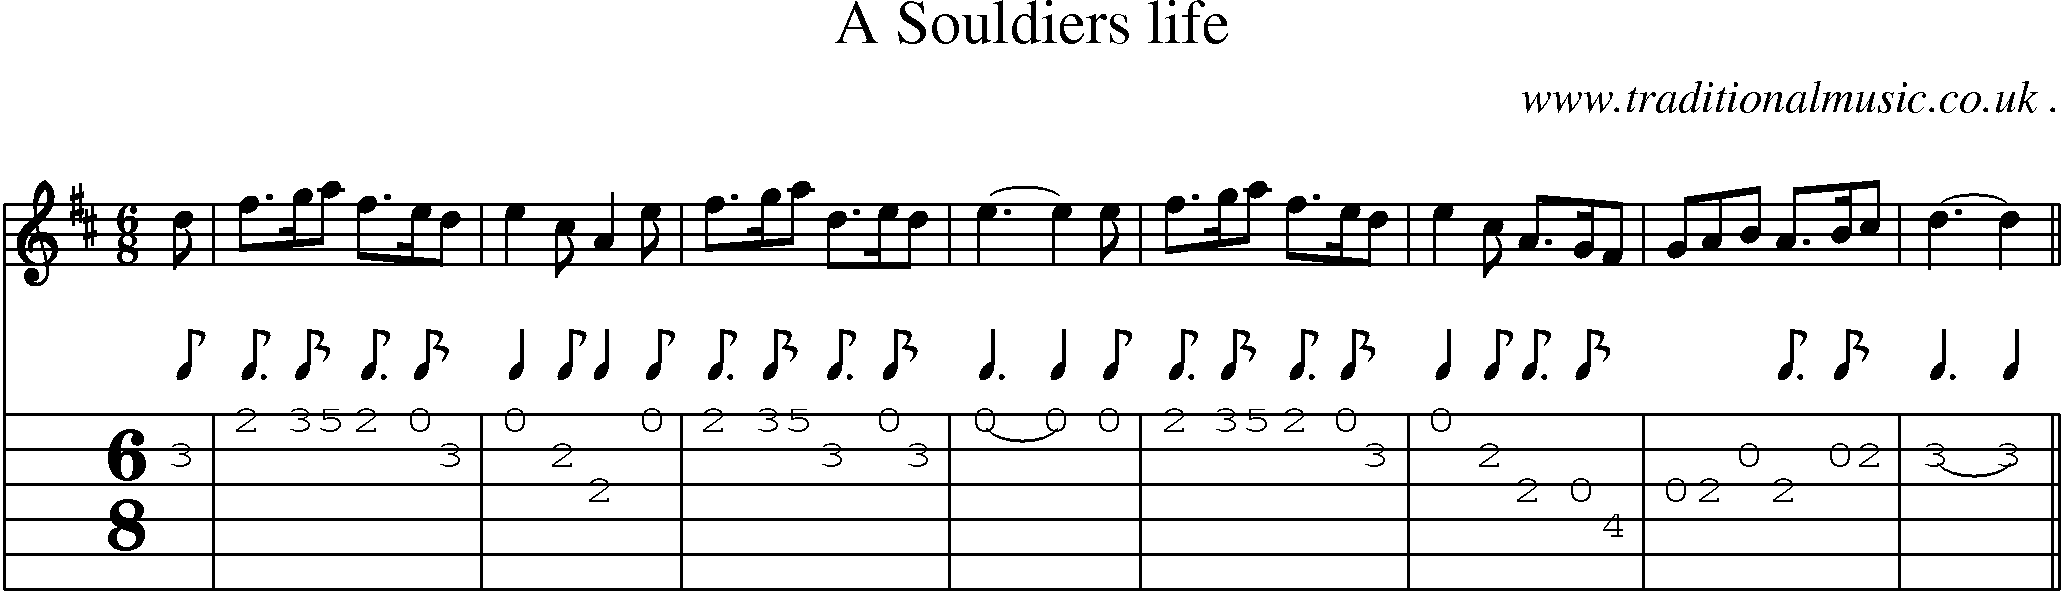 Sheet-music  score, Chords and Guitar Tabs for A Souldiers Life